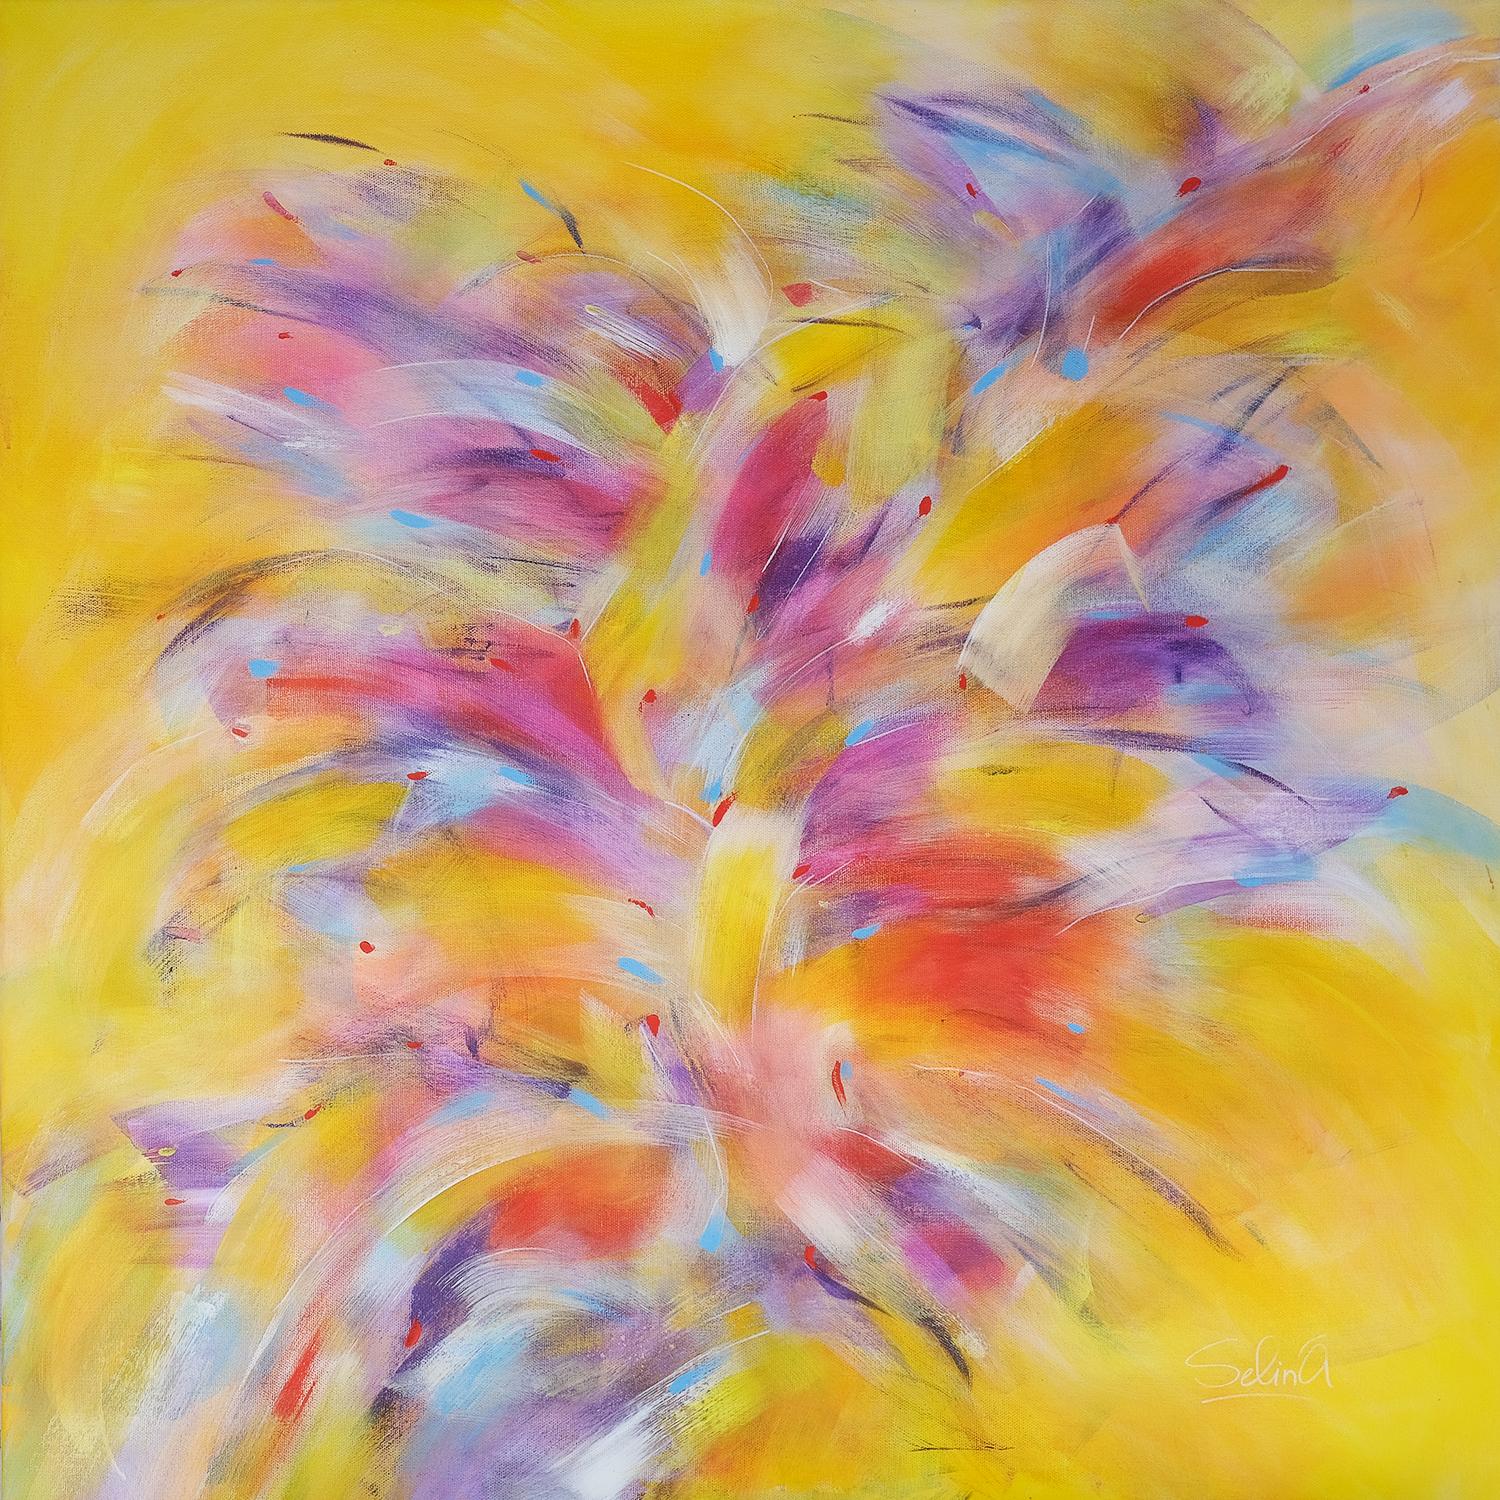 Serenity, Modern Colorful Abstract Painting 100x100cm by Anna Selina